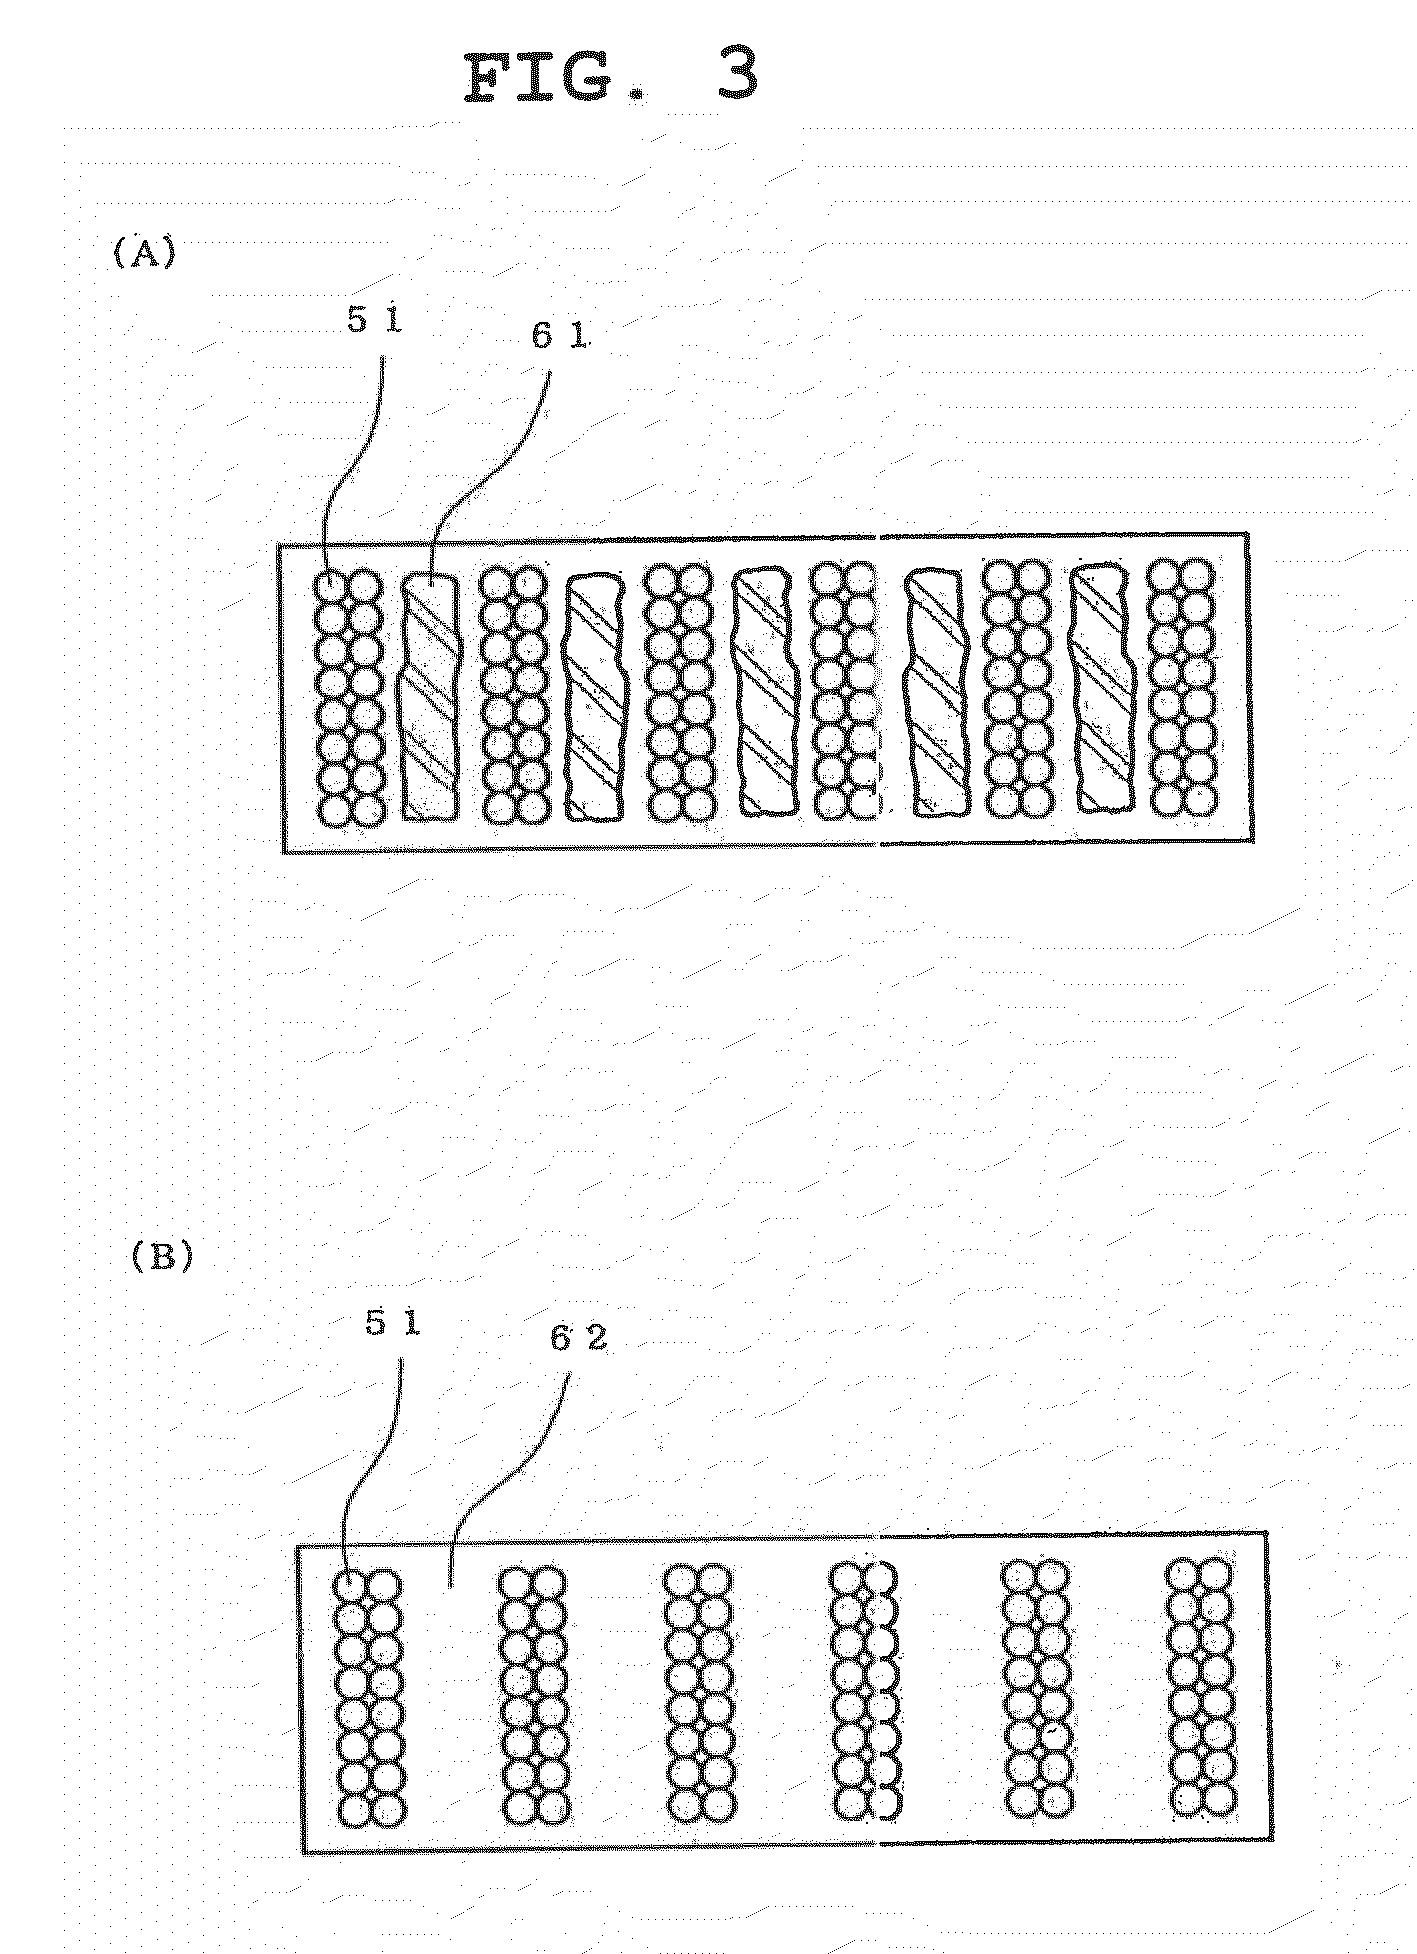 Porous ceramic material and method of producing the same